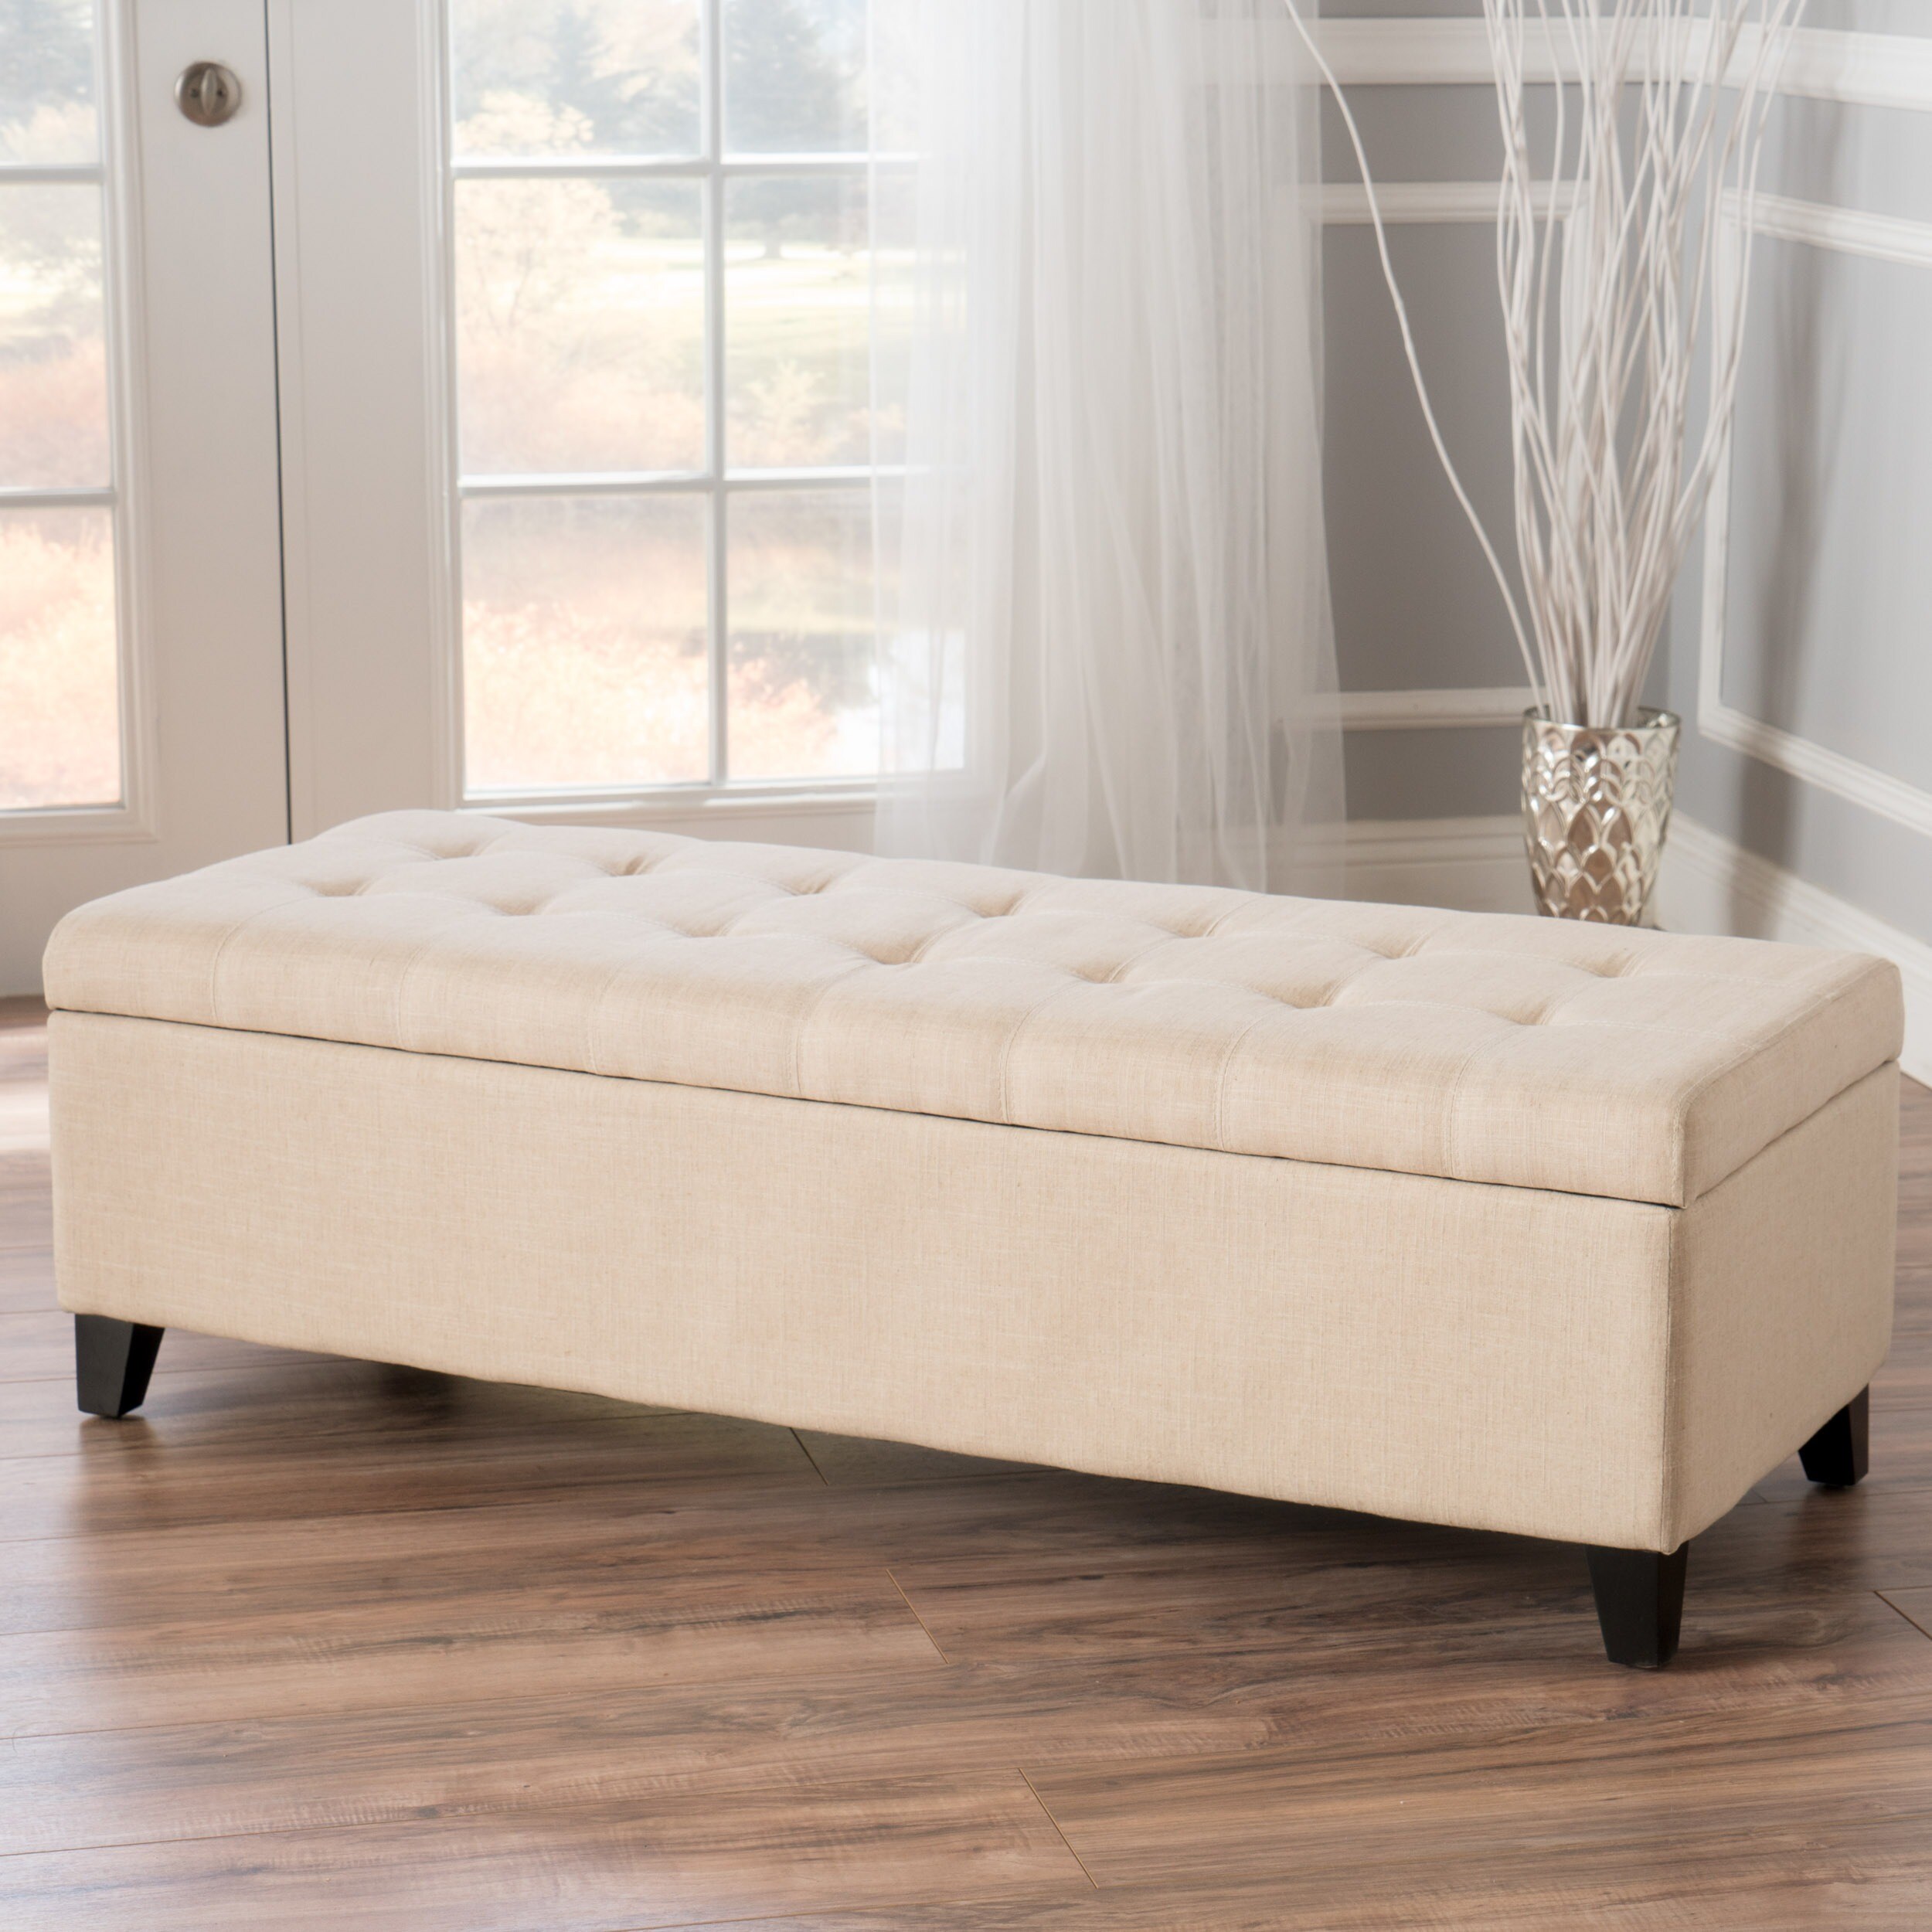 Christopher Knight Home Mission Beige Tufted Fabric Storage Ottoman Bench